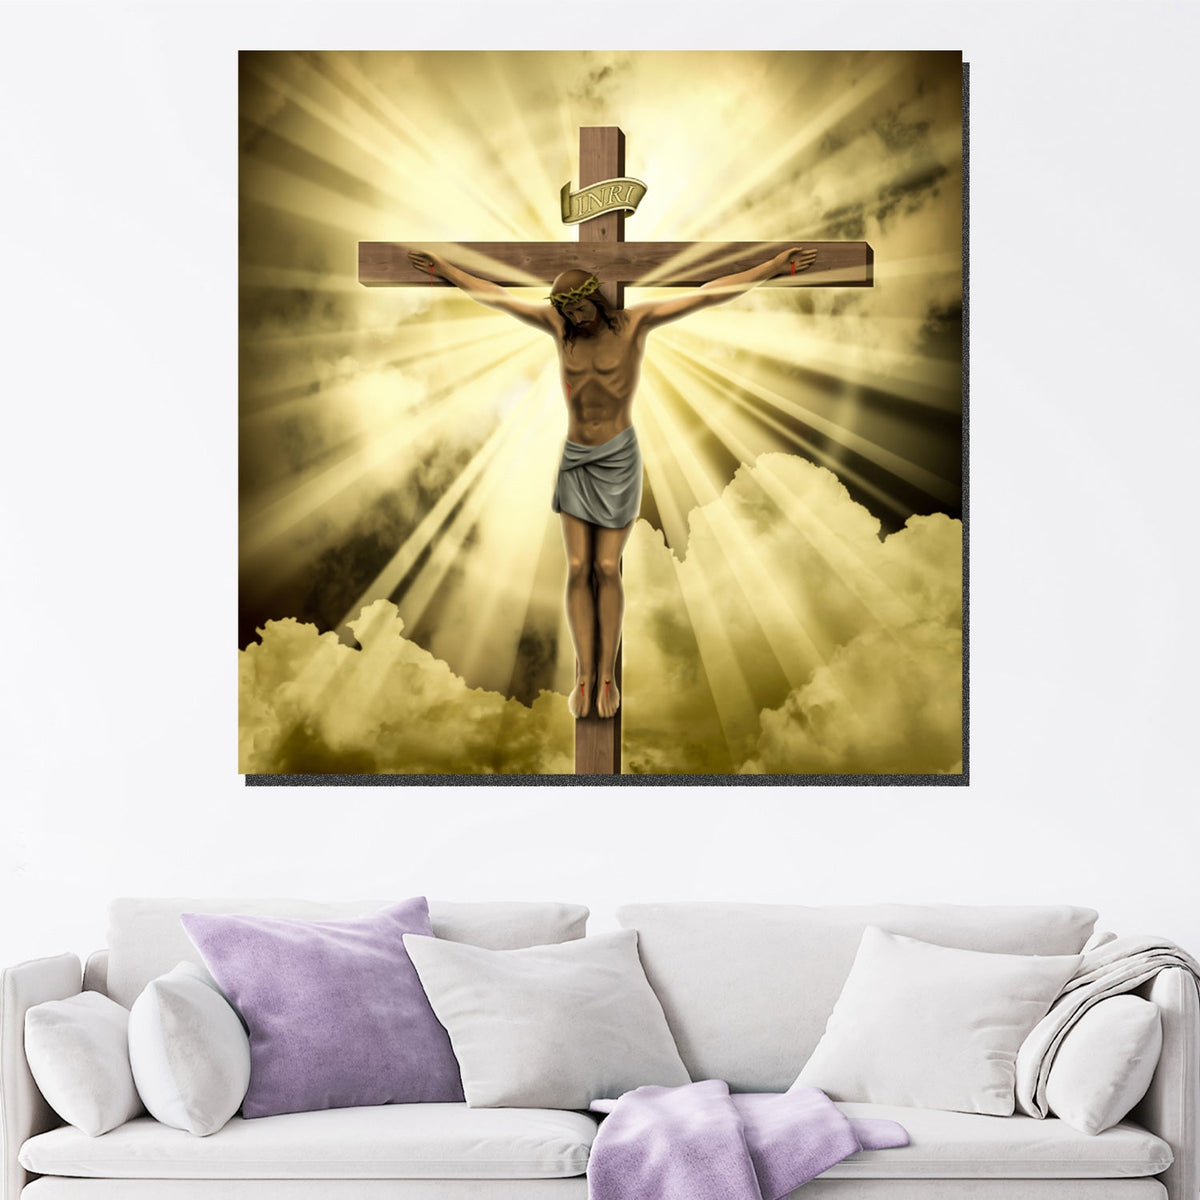 https://cdn.shopify.com/s/files/1/0387/9986/8044/products/JesusINRICanvasArtprintStretched-2.jpg